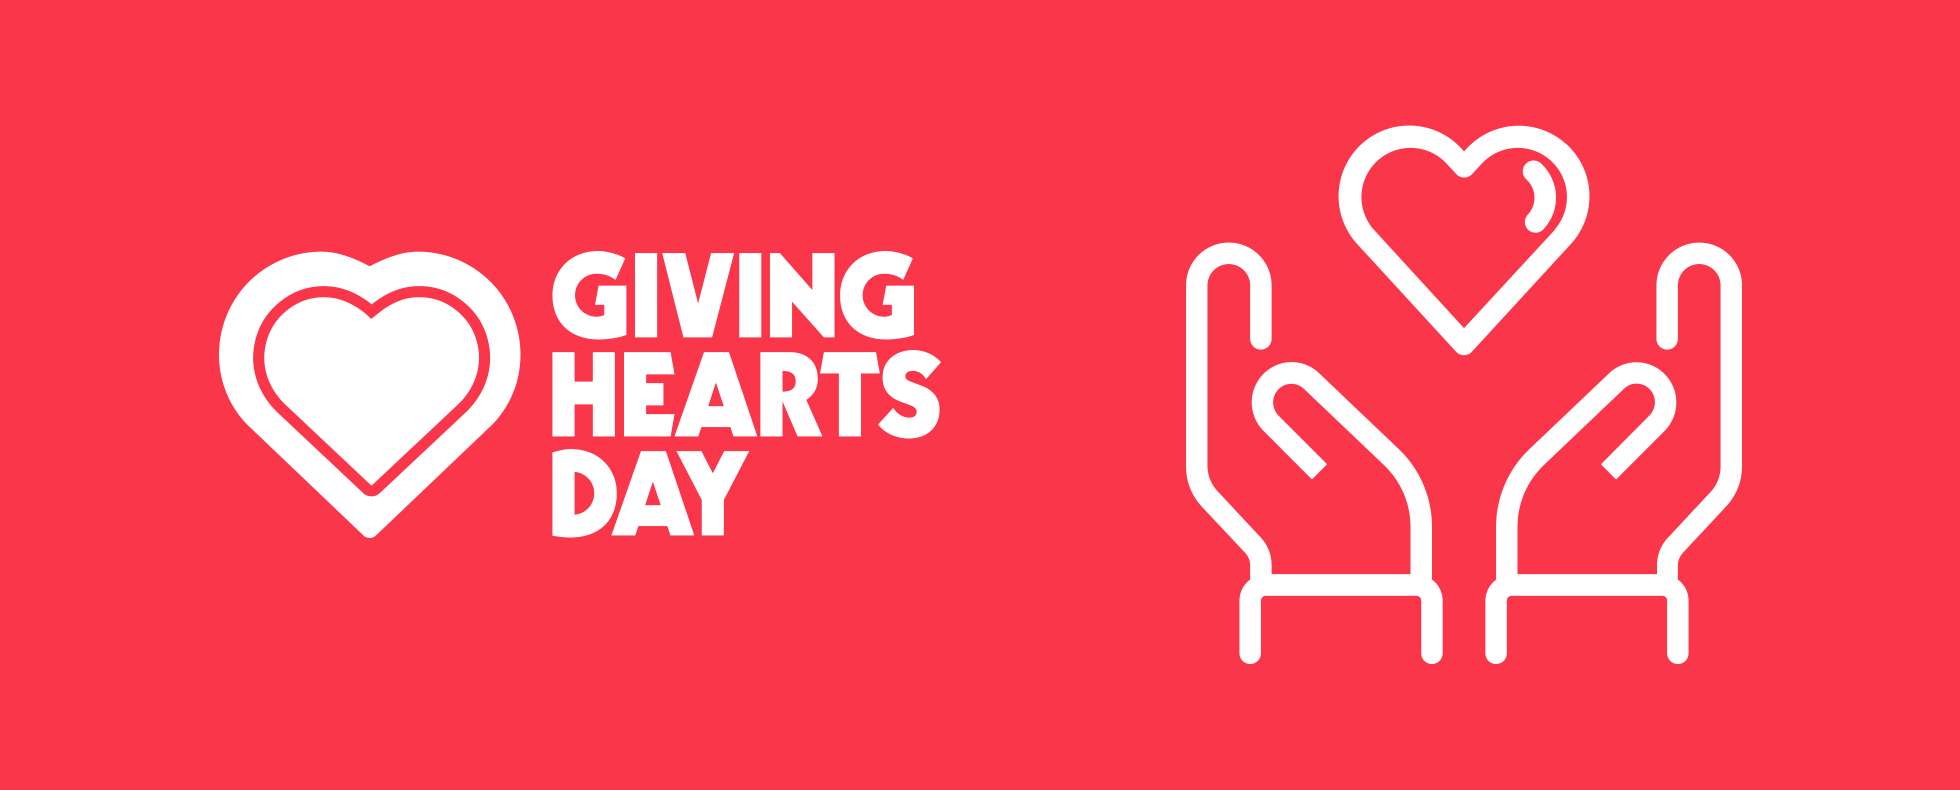 Generosity Goes Further for the RDO Equipment Co. Team on Giving Hearts Day